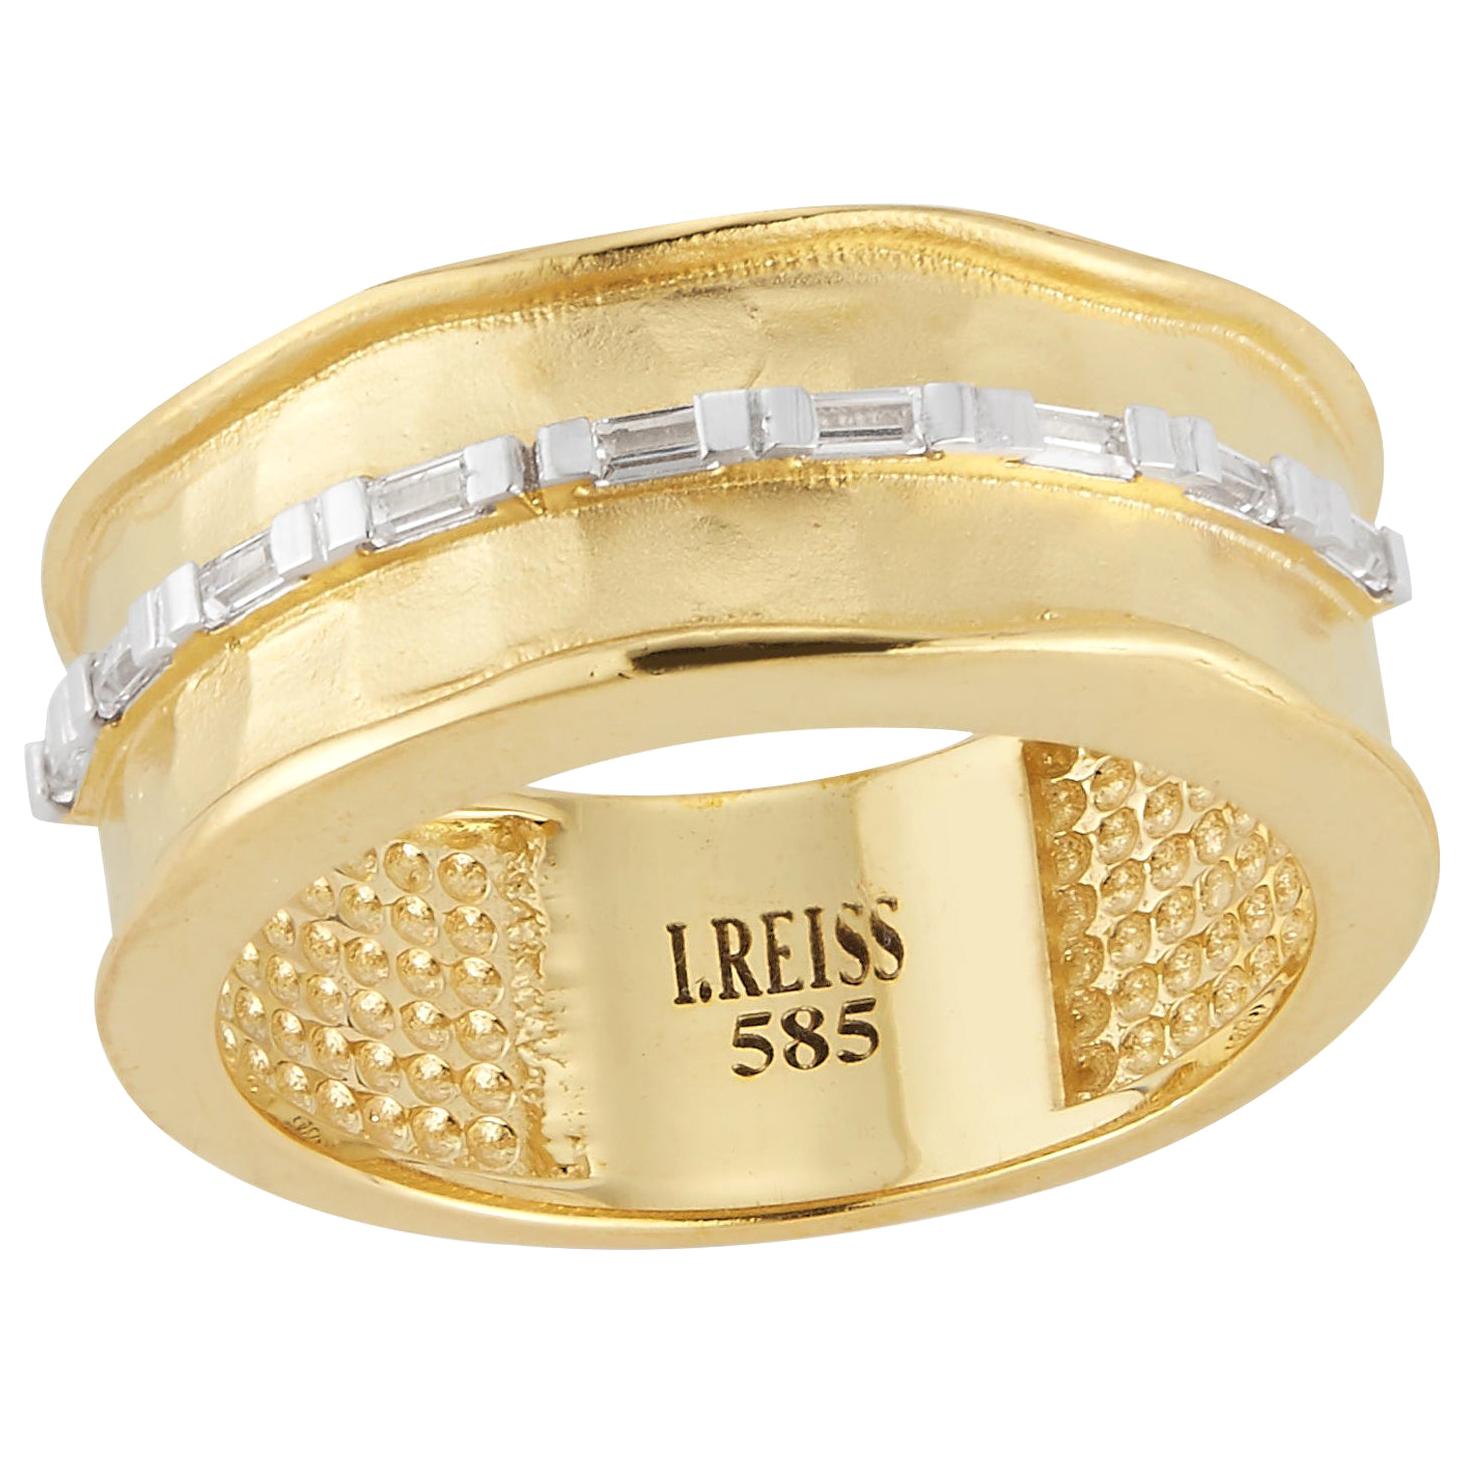 Handcrafted 14 Karat Yellow Gold Hammered Ring with Baguette Diamonds